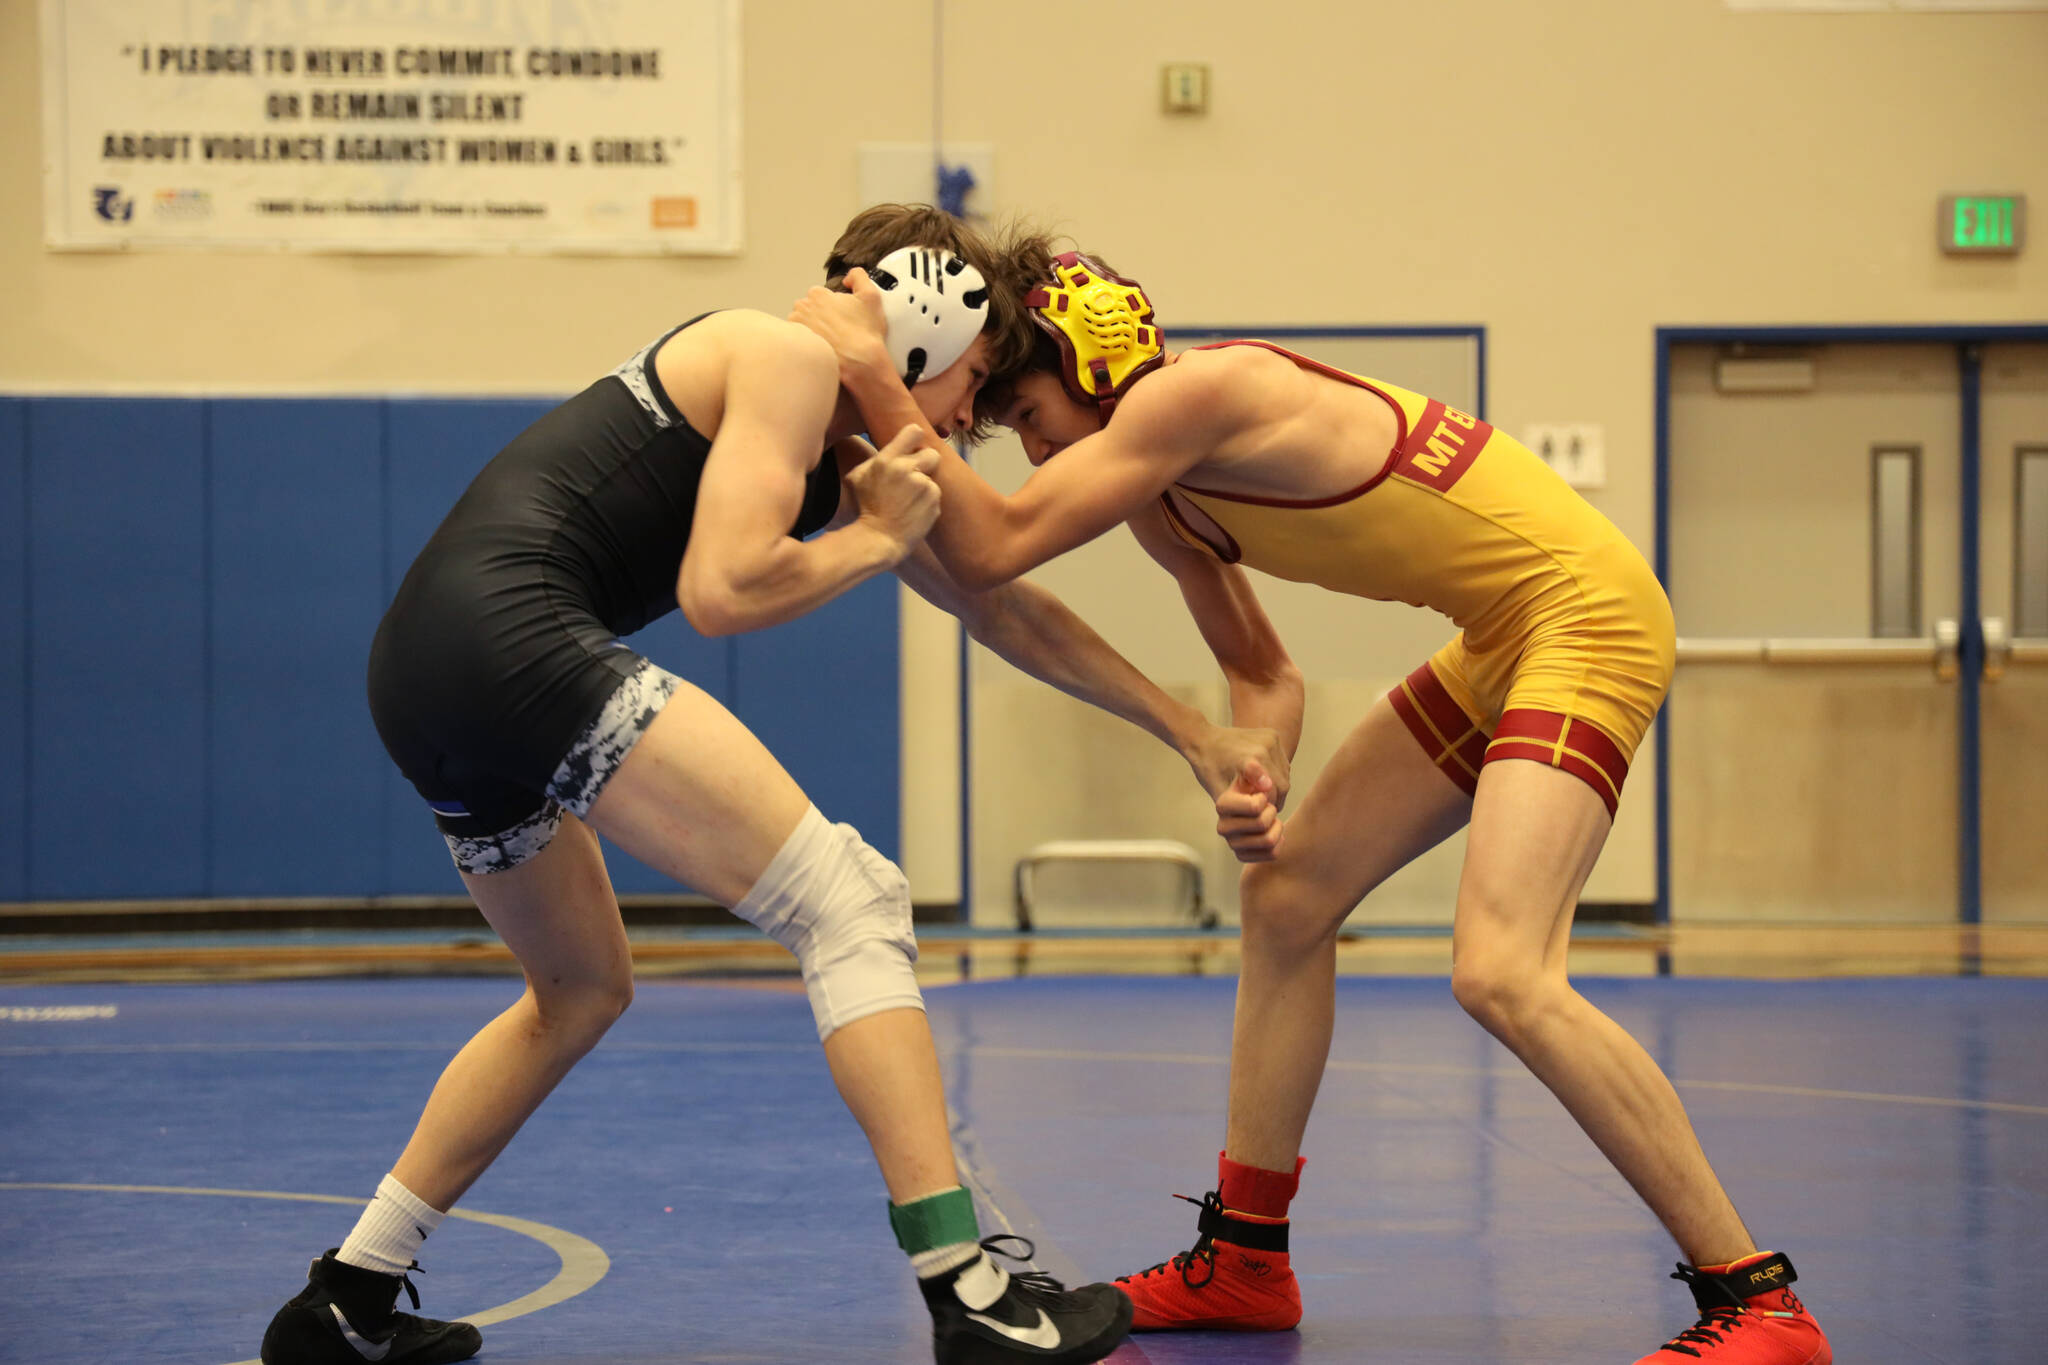 Thunder Mountain High School wrestler Carson Cummins goes head to head with his competition Saturday afternoon during the Brandon Pilot Invitational Wrestling Tournament at THMS. At 119 lbs. senior, Cummins took first going 7-0 for the weekend. (Clarise Larson / Juneau Empire)